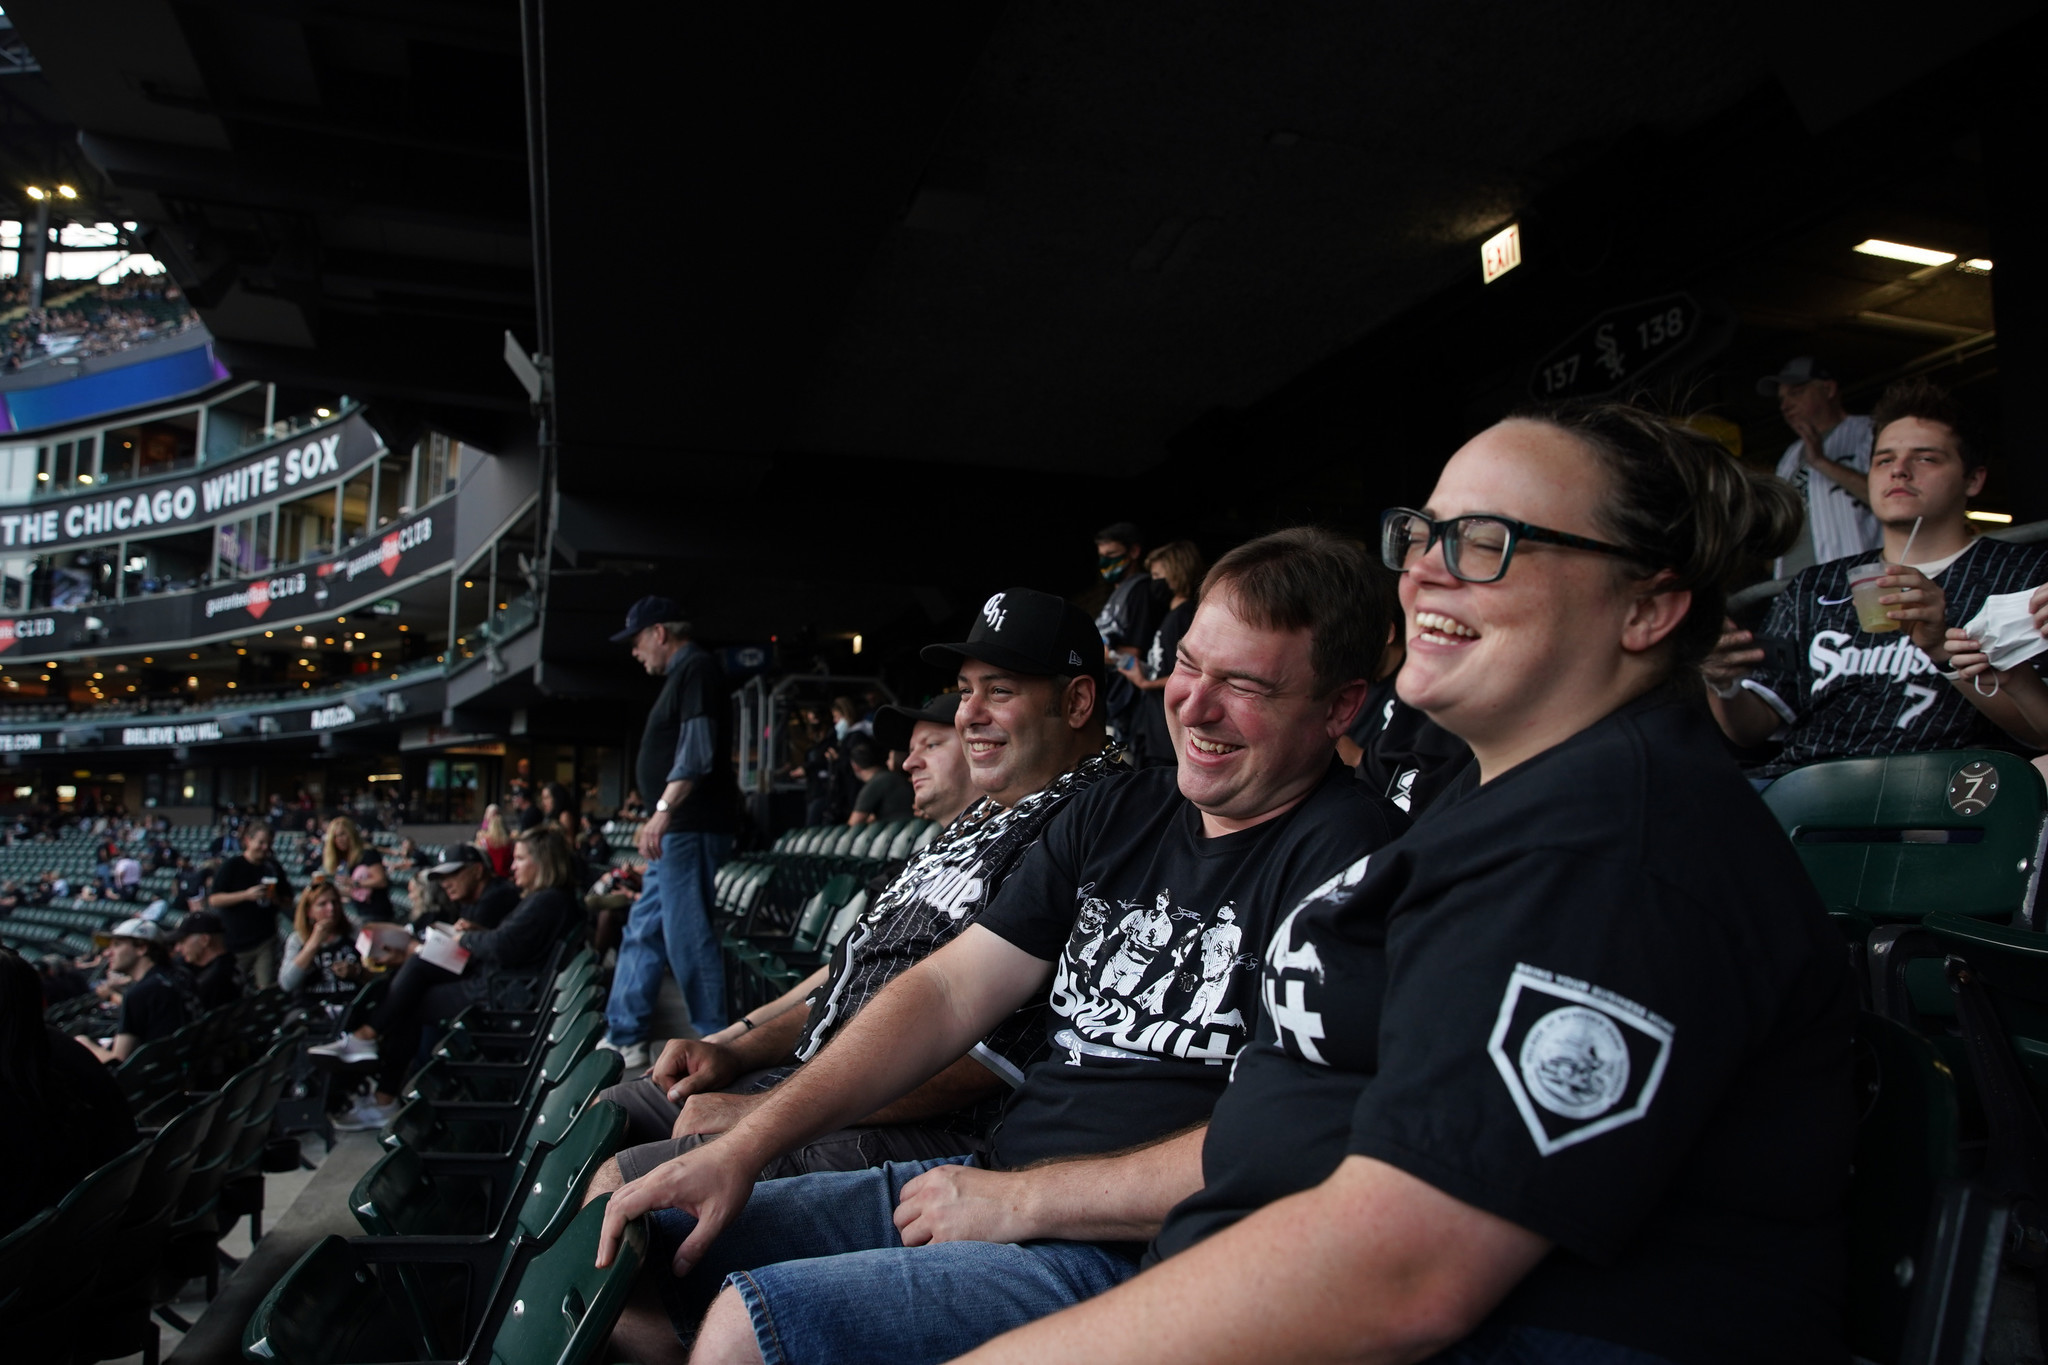 White Sox build their fan base during MLB playoffs